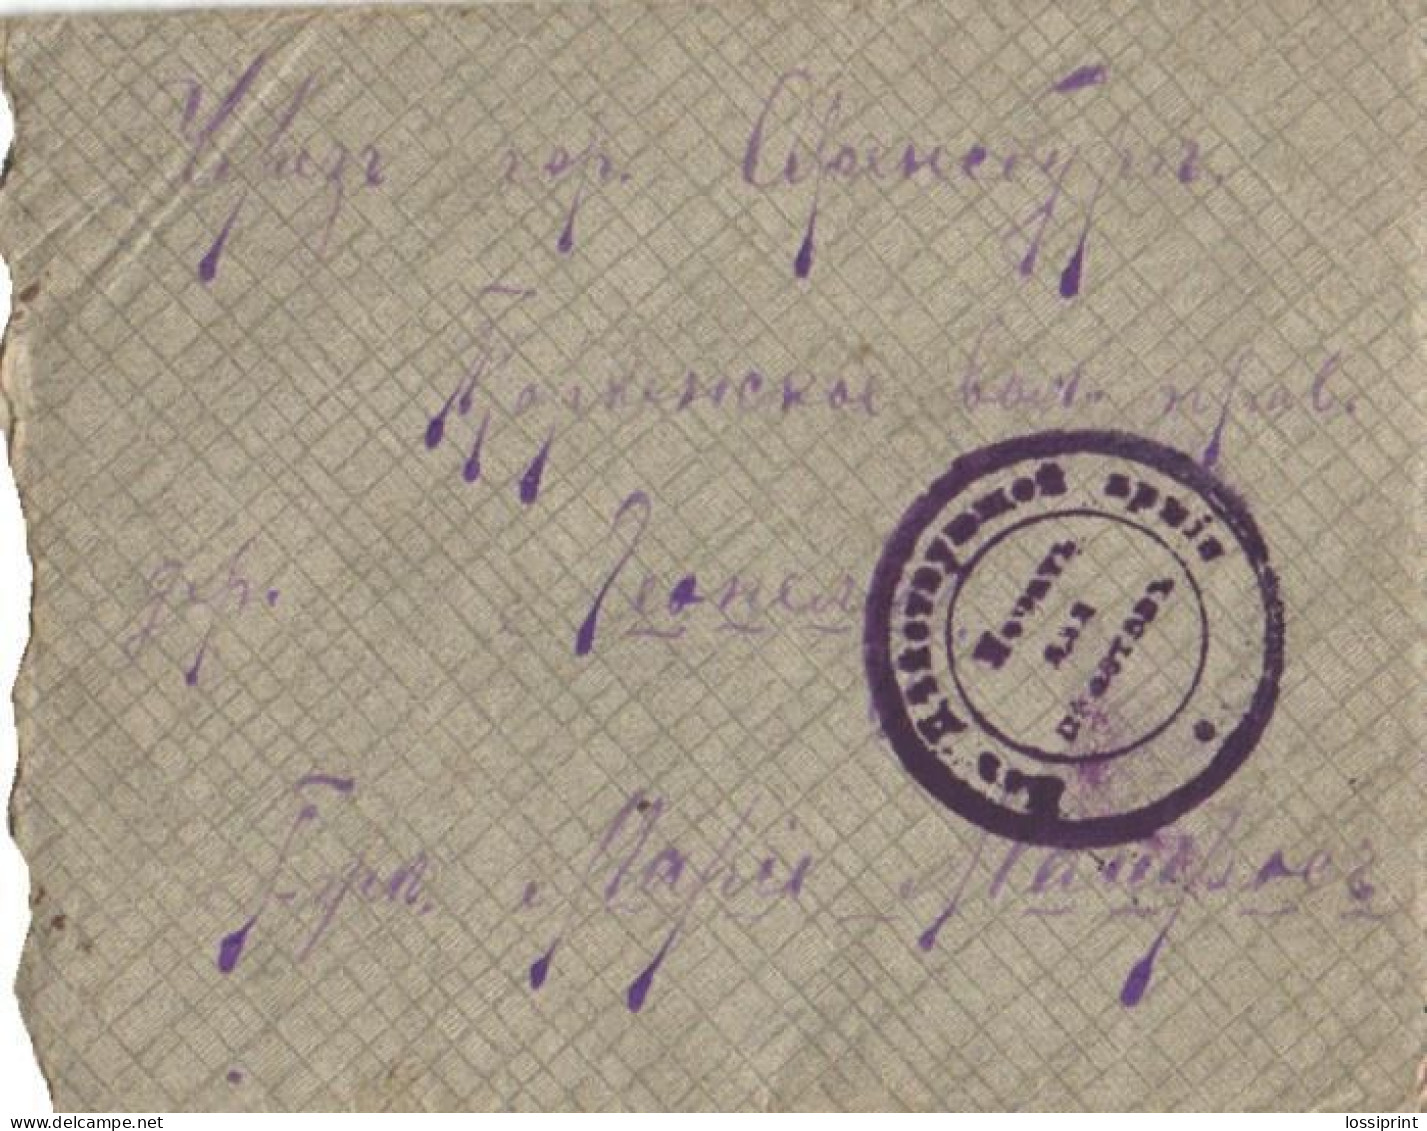 Russia:Estonia:Fieldpost From Active Army, Cancellation For Packages, 1916? - Brieven En Documenten